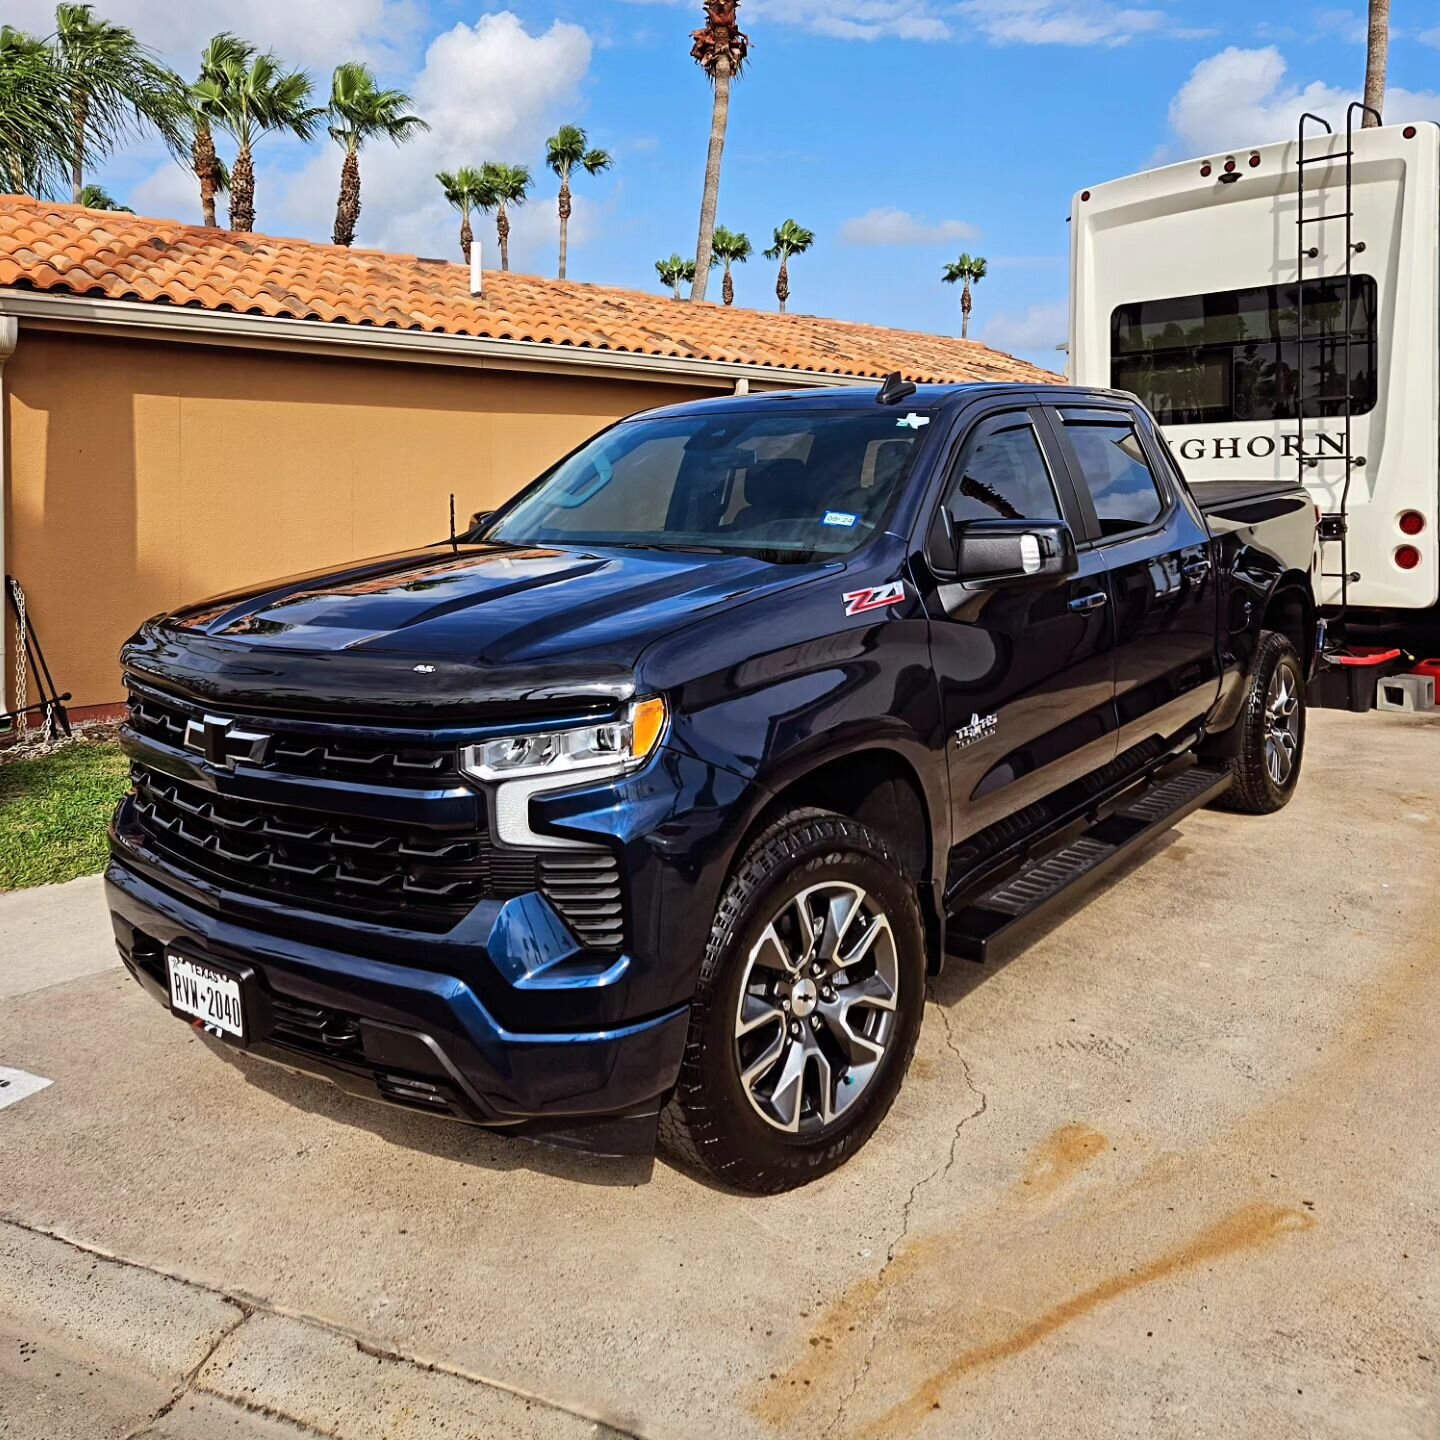 2022 Chevy Silverado was provided a Polish (1-Step) &amp; 1 Year Coating for our client! 

Our client purchased the vehicle and immediately called us to perfect the exterior and protect it from the Texas heat.

Visit our website that is in our bio fo